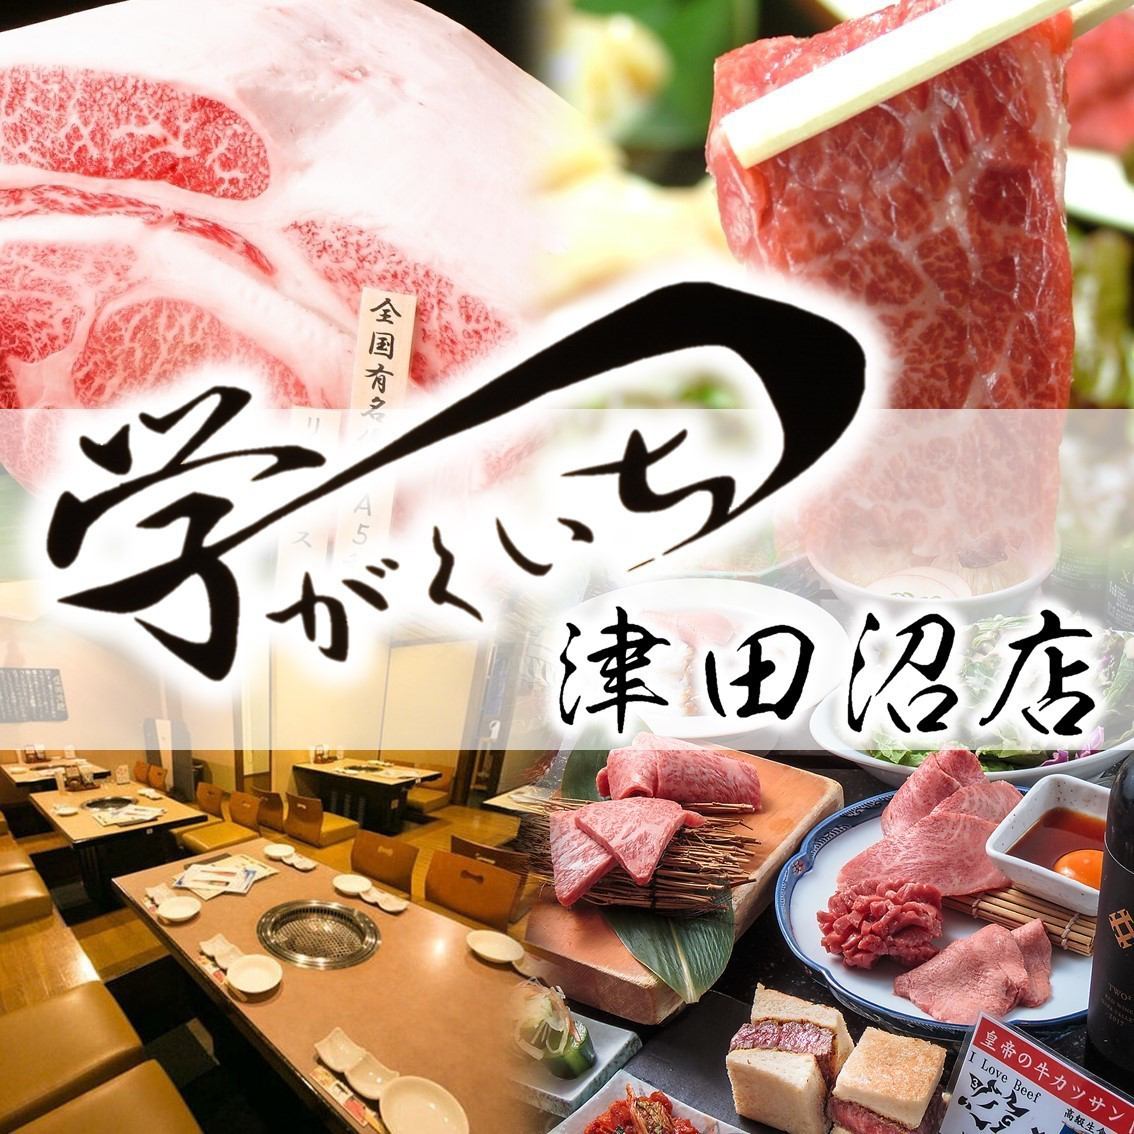 We are proud of the highest quality Kuroge Wagyu beef and authentic Morioka cold noodles! After 8:00 pm on weekdays, the Gakuichi Tsudanuma store is a great deal ♪